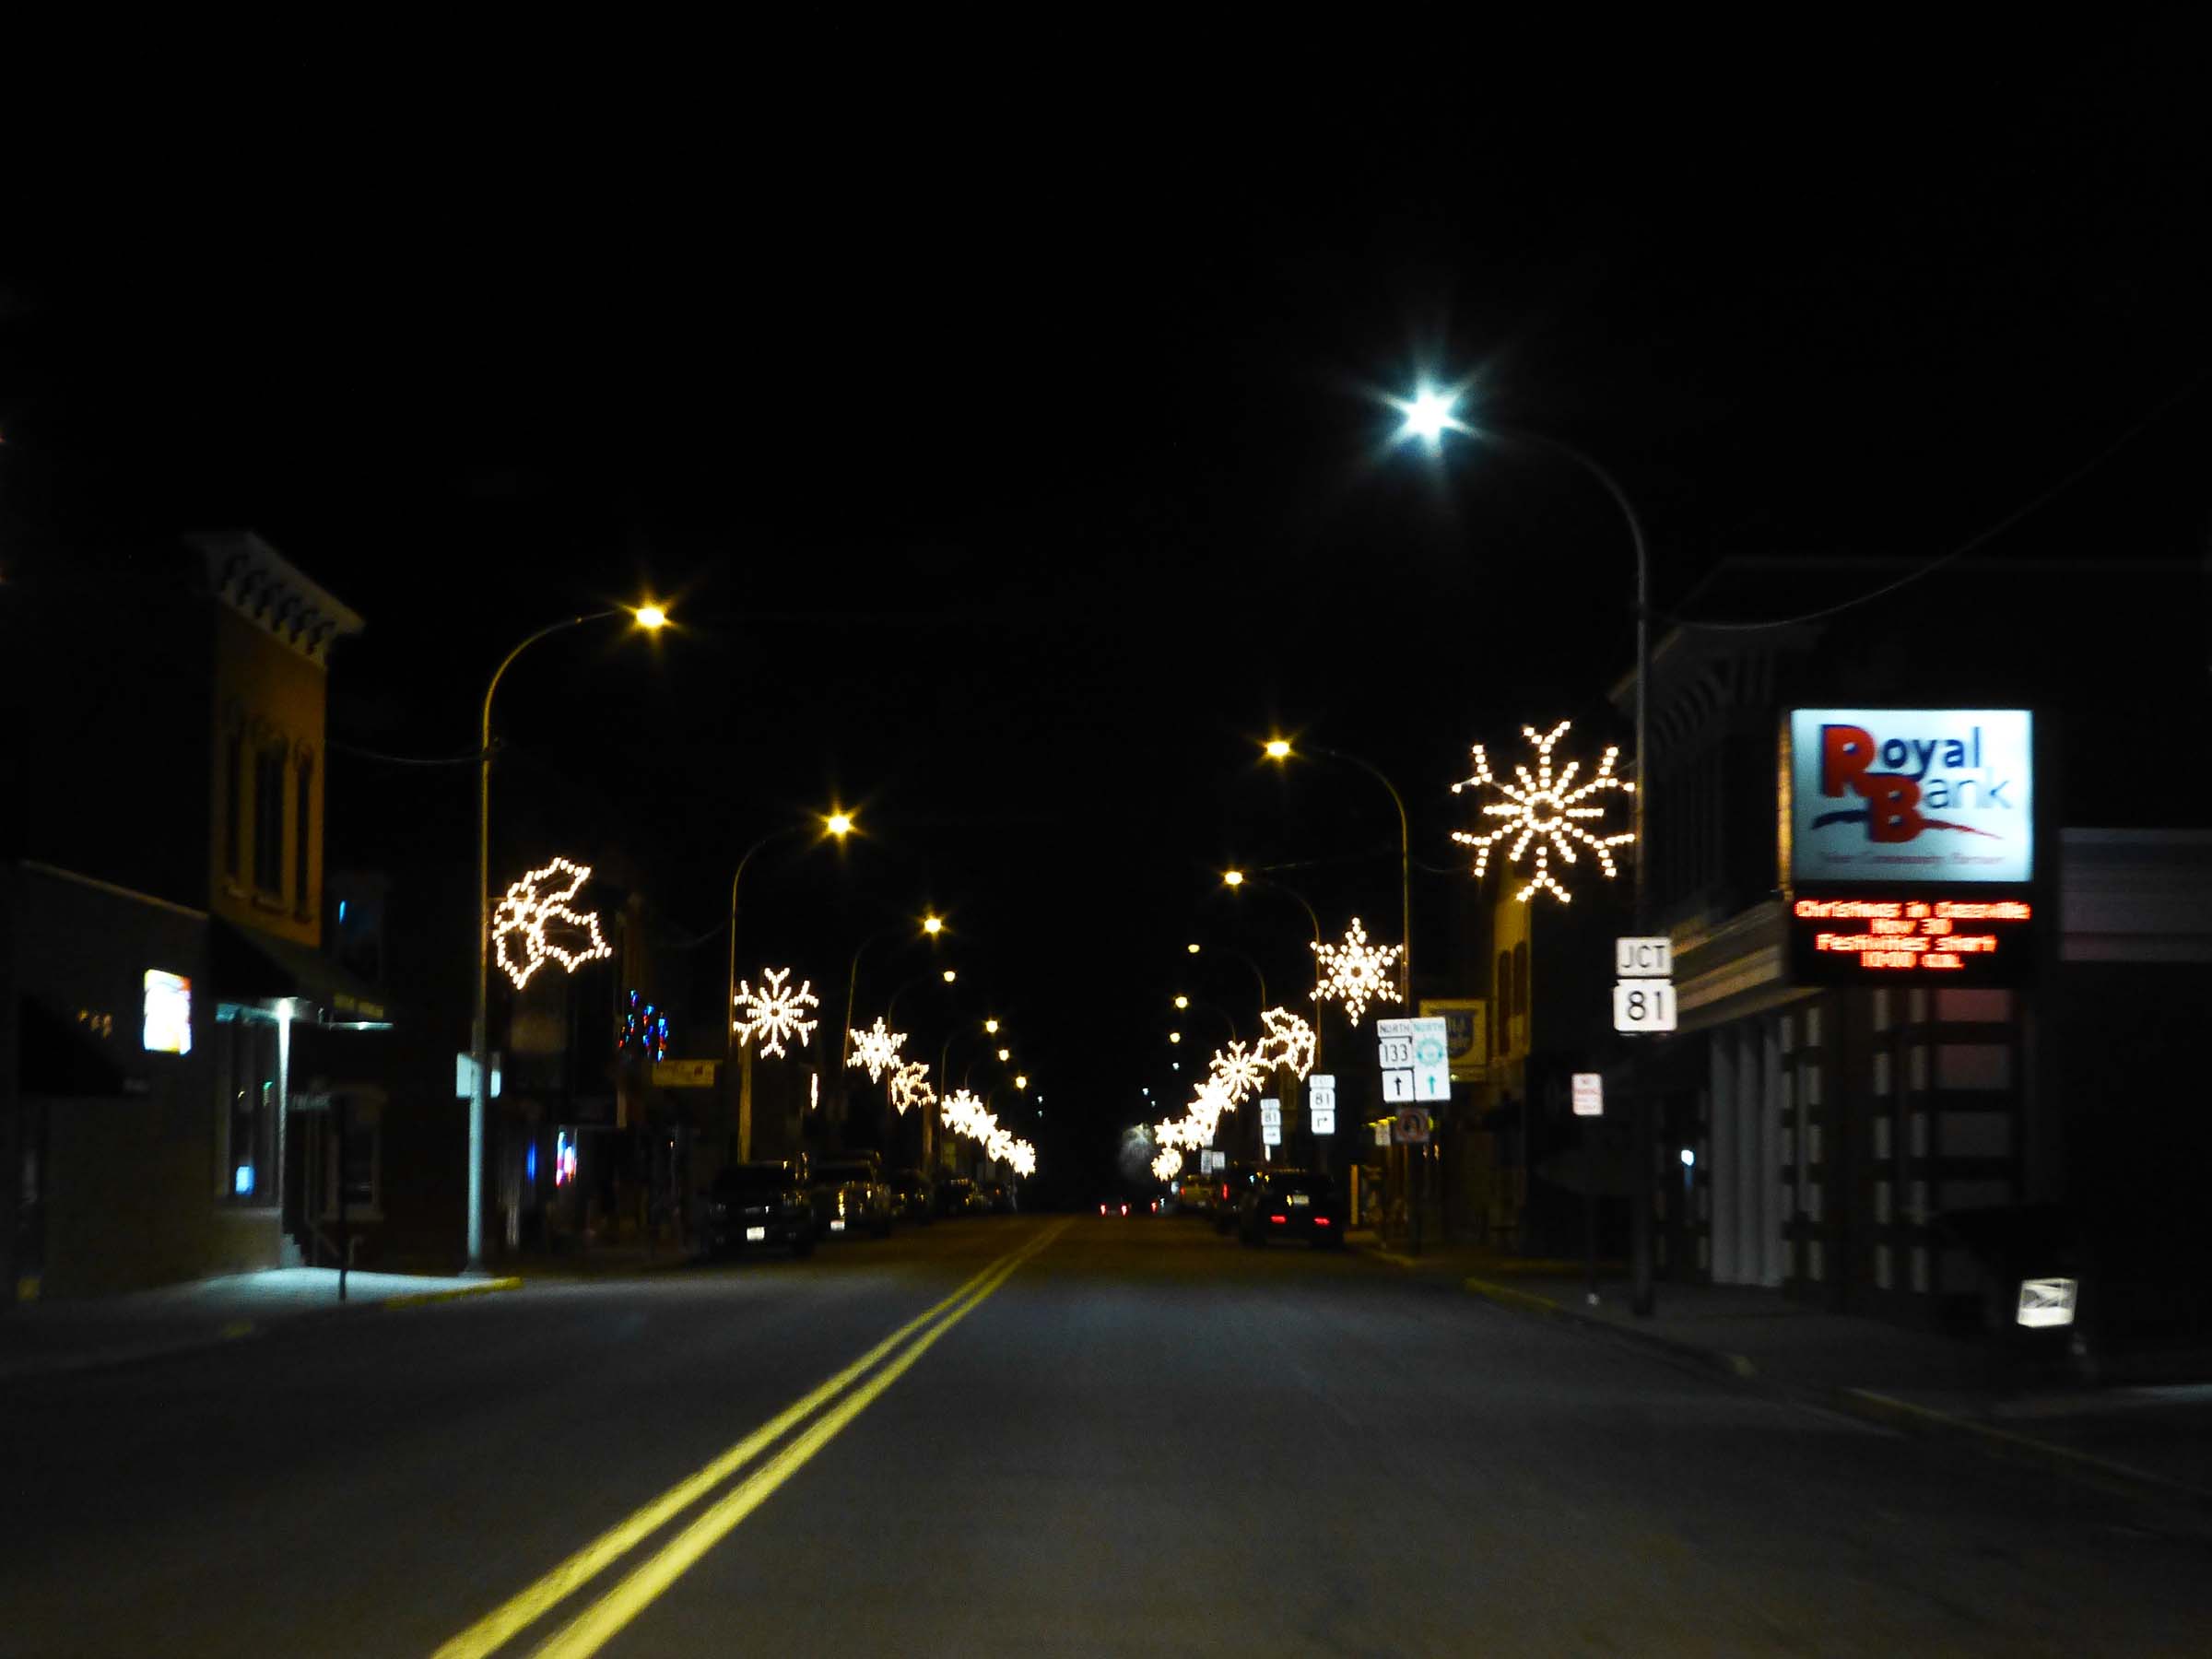 27 Nov Getting ready for Christmas in Cassville